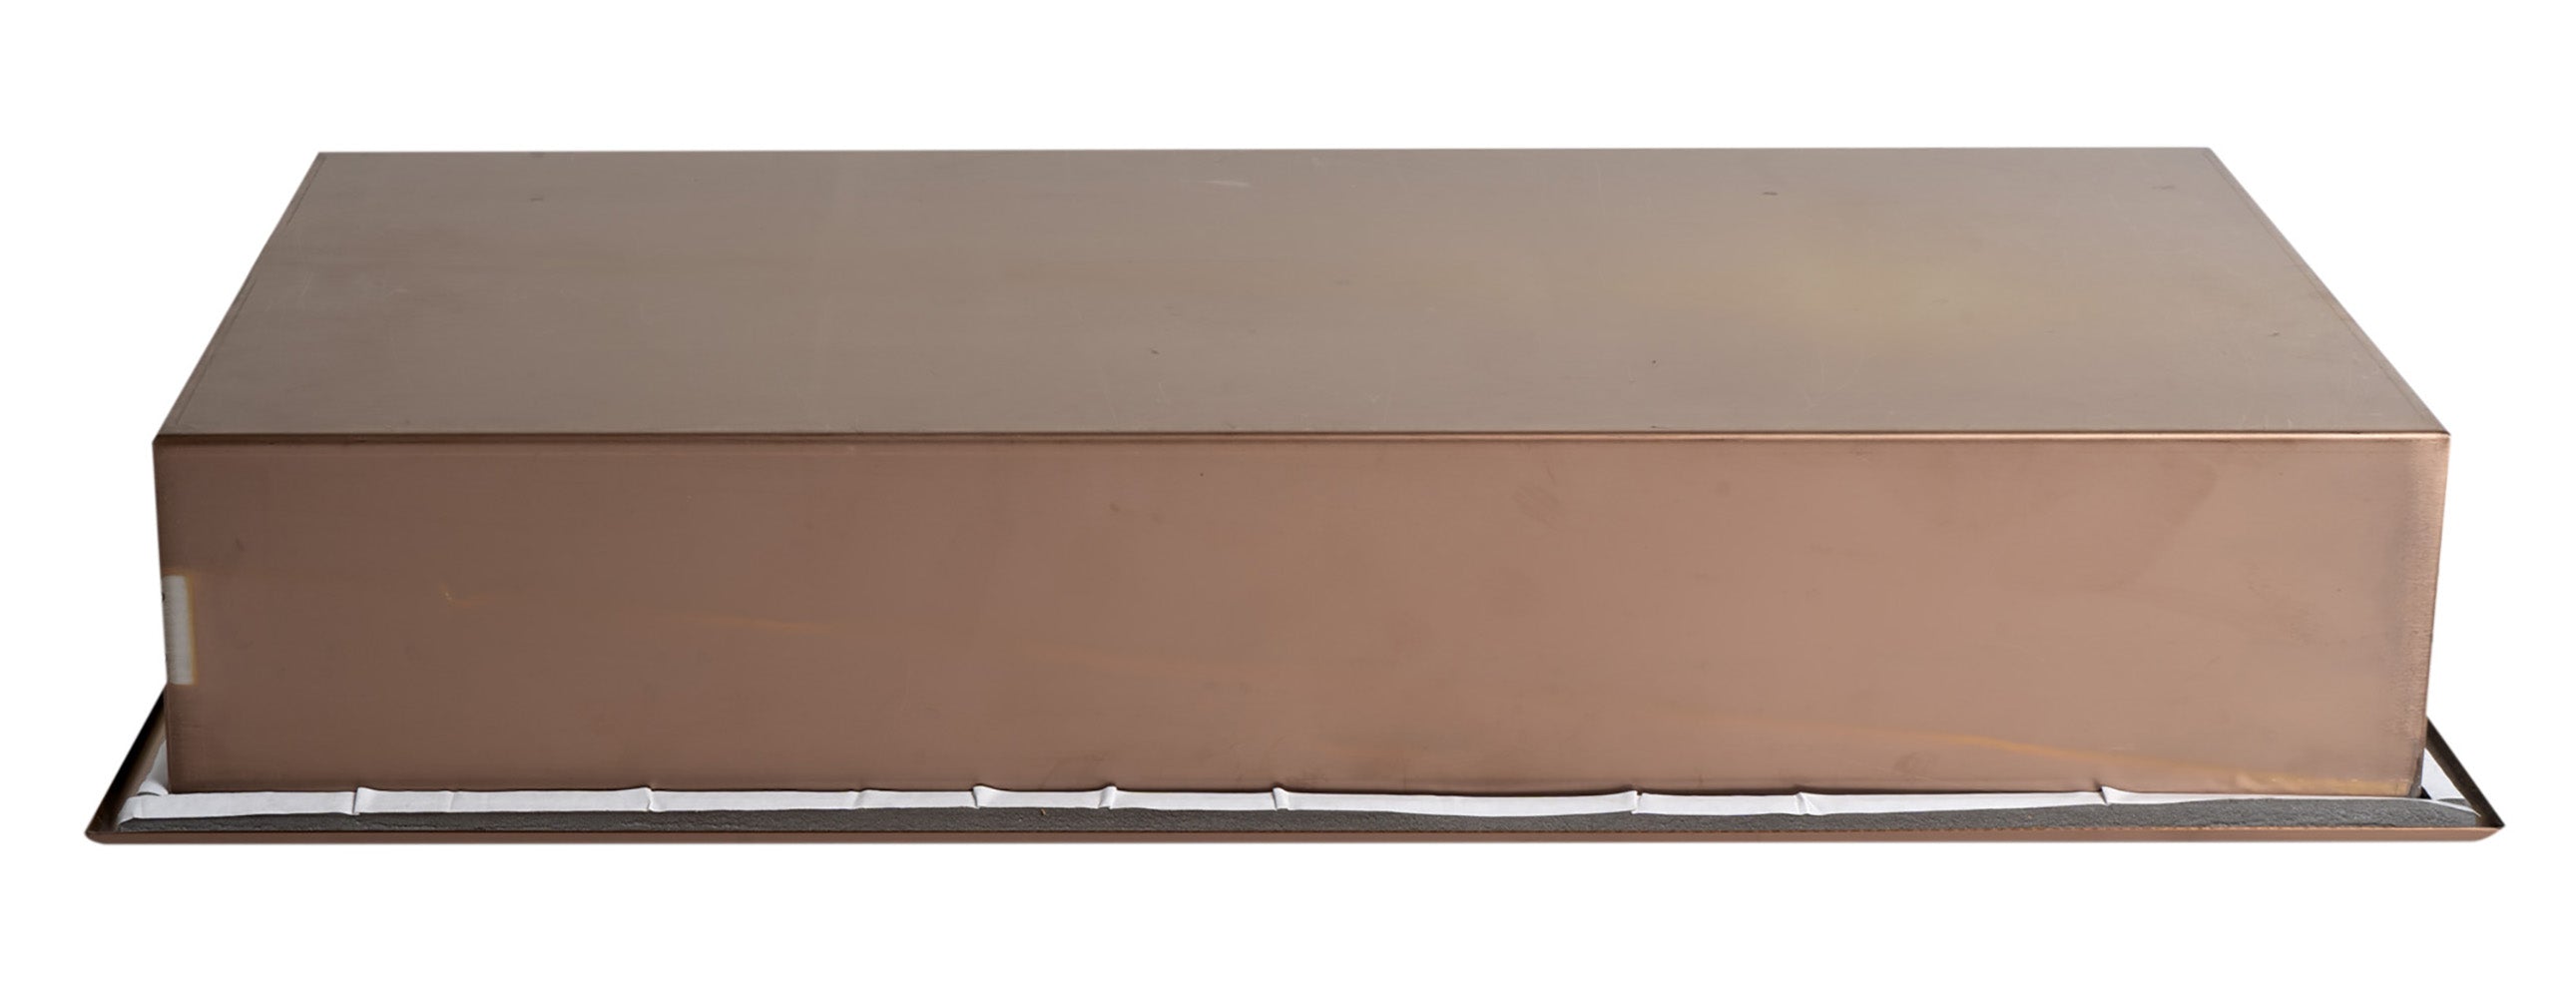 ALFI brand ABNP2412-BC 24Inch x 12Inch Brushed Copper PVD Stainless Steel Horizontal Single Shelf Shower Niche